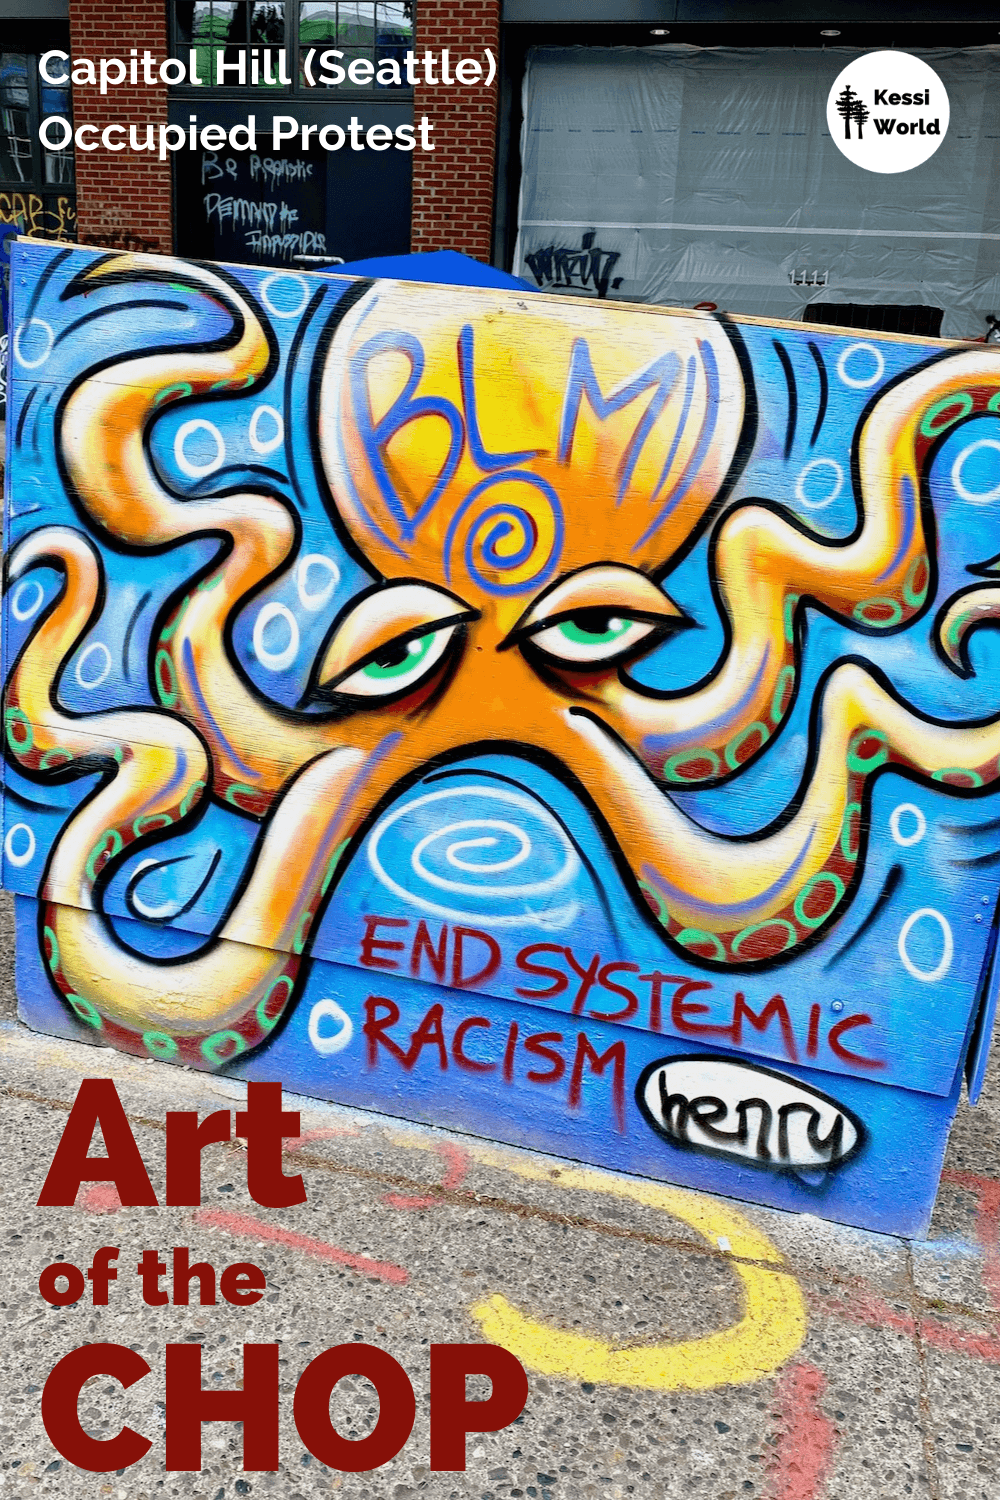 This photo was taken near the CHOP zone in the Seattle neighborhood of Capitol Hill. CHOP stands for Capitol Hill Occupied Protest. This mural is painted on plywood affixed to a traffic barrier and shows an orange colored octopus against a blue back drop with blue letters that say BLM and red lettering that says, End Systemic Racism.